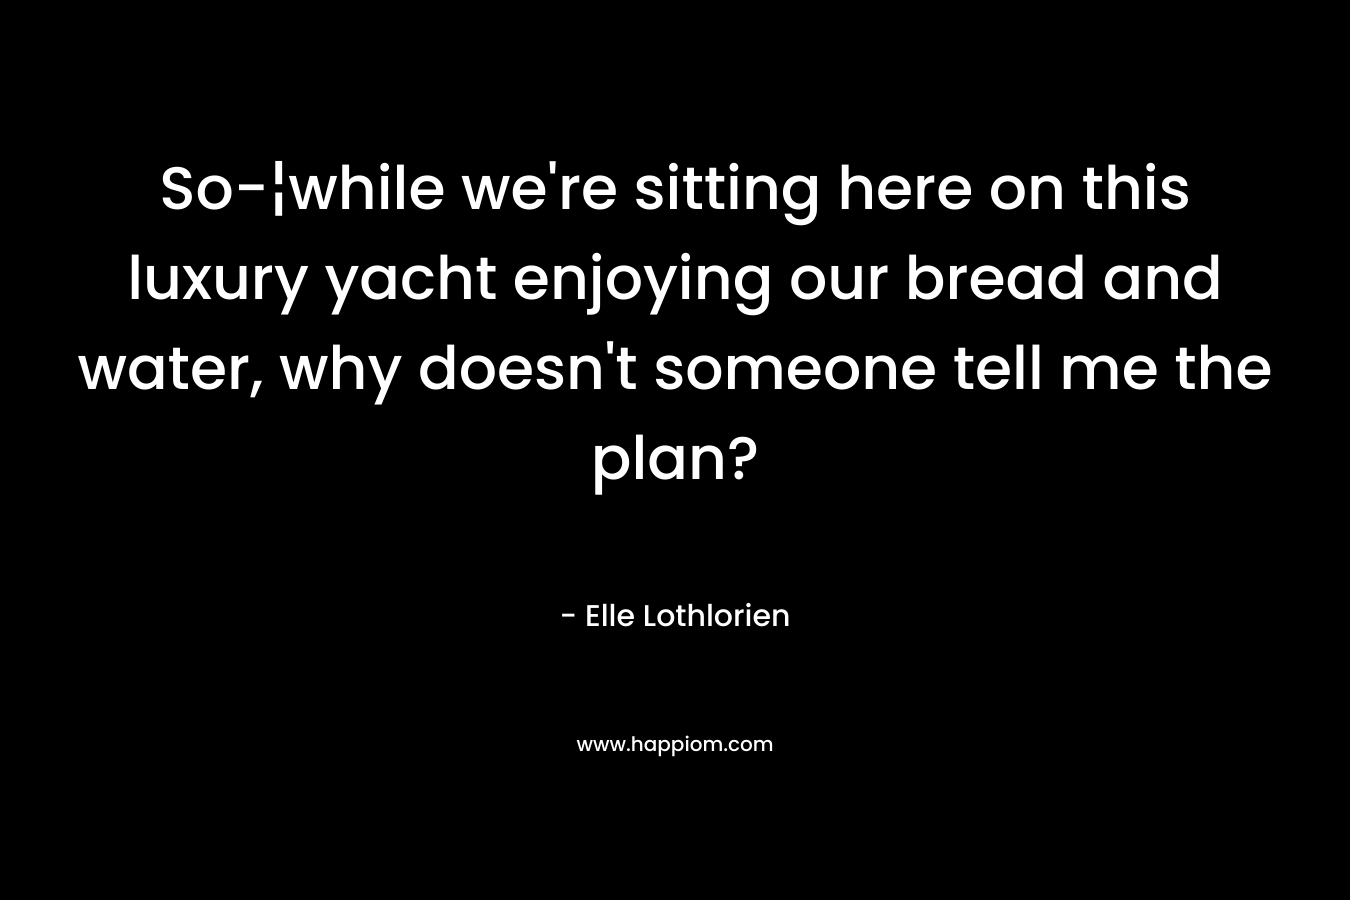 So-¦while we're sitting here on this luxury yacht enjoying our bread and water, why doesn't someone tell me the plan?